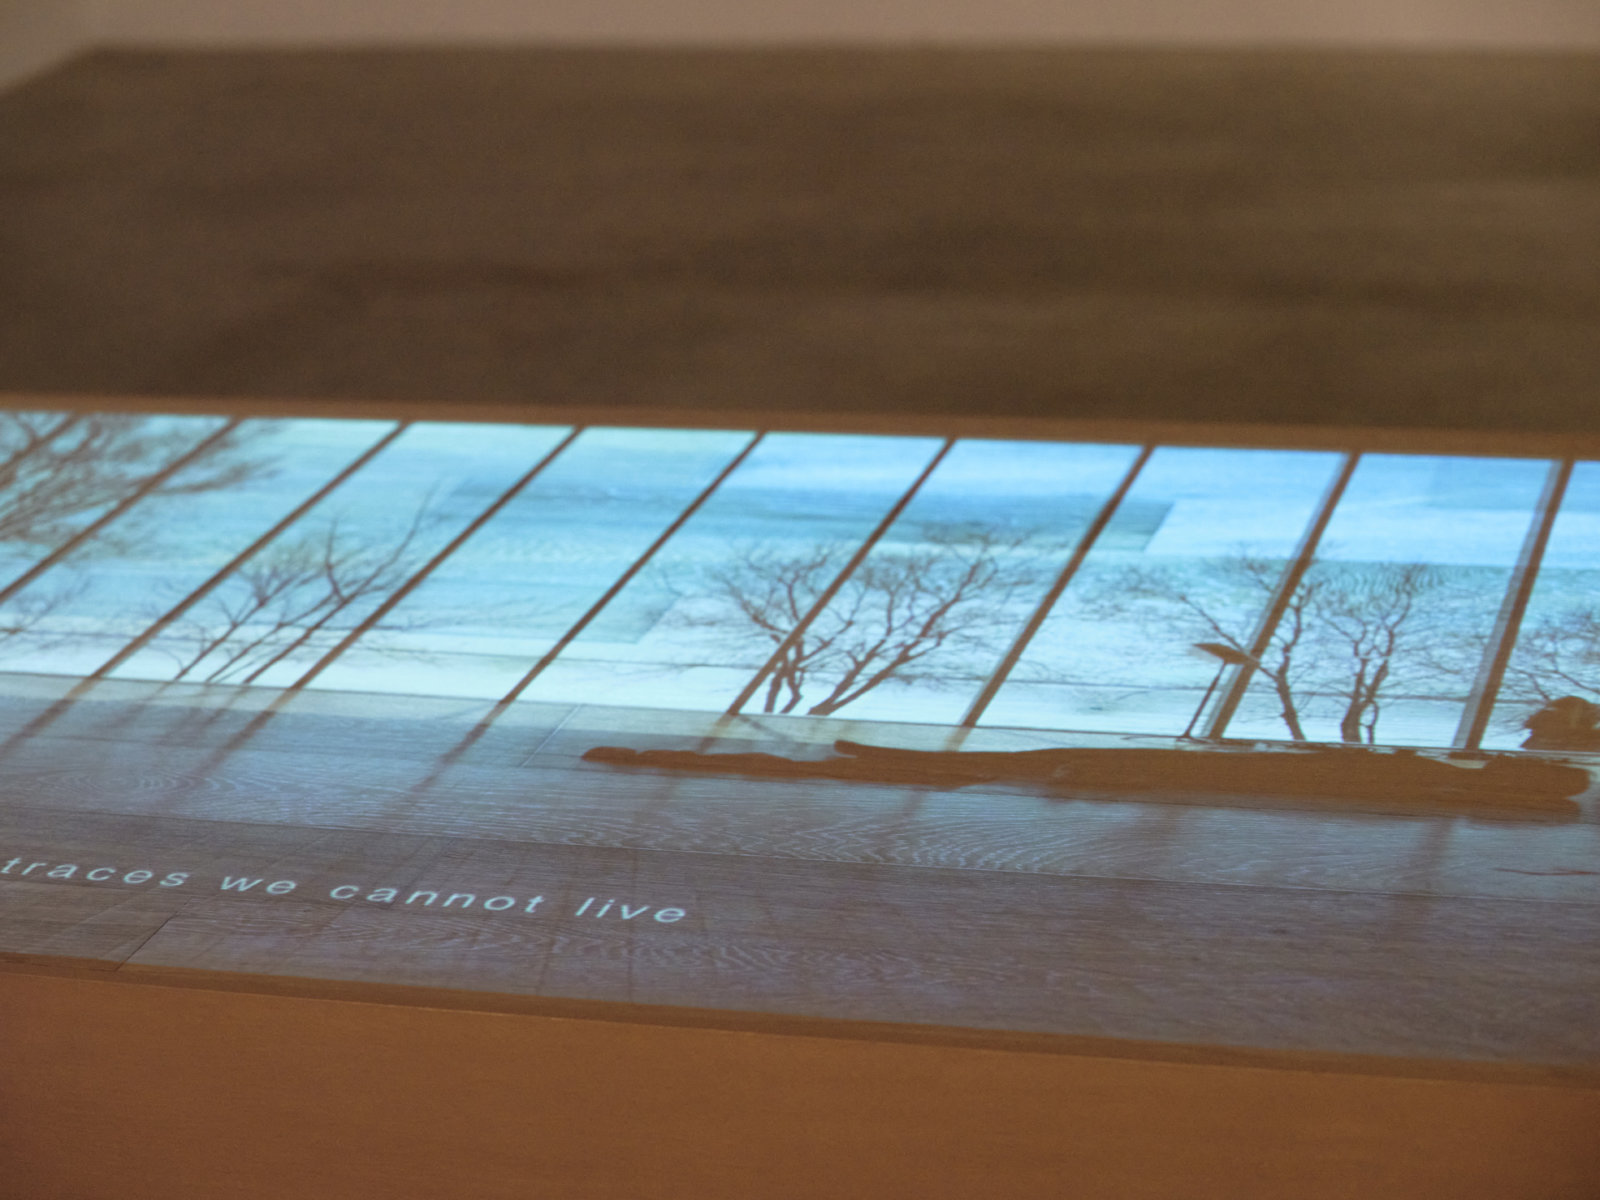 Tanya Lukin Linklater, We wear one another (detail), 2019⁠, site-specific performance projected on wood plinth, 48 x 24 x 85 in. (122 x 61 x 216 cm), 25 minutes, 18 seconds. Installation view, Soundings, Morris and Helen Belkin Art Gallery, Vancouver, 2020